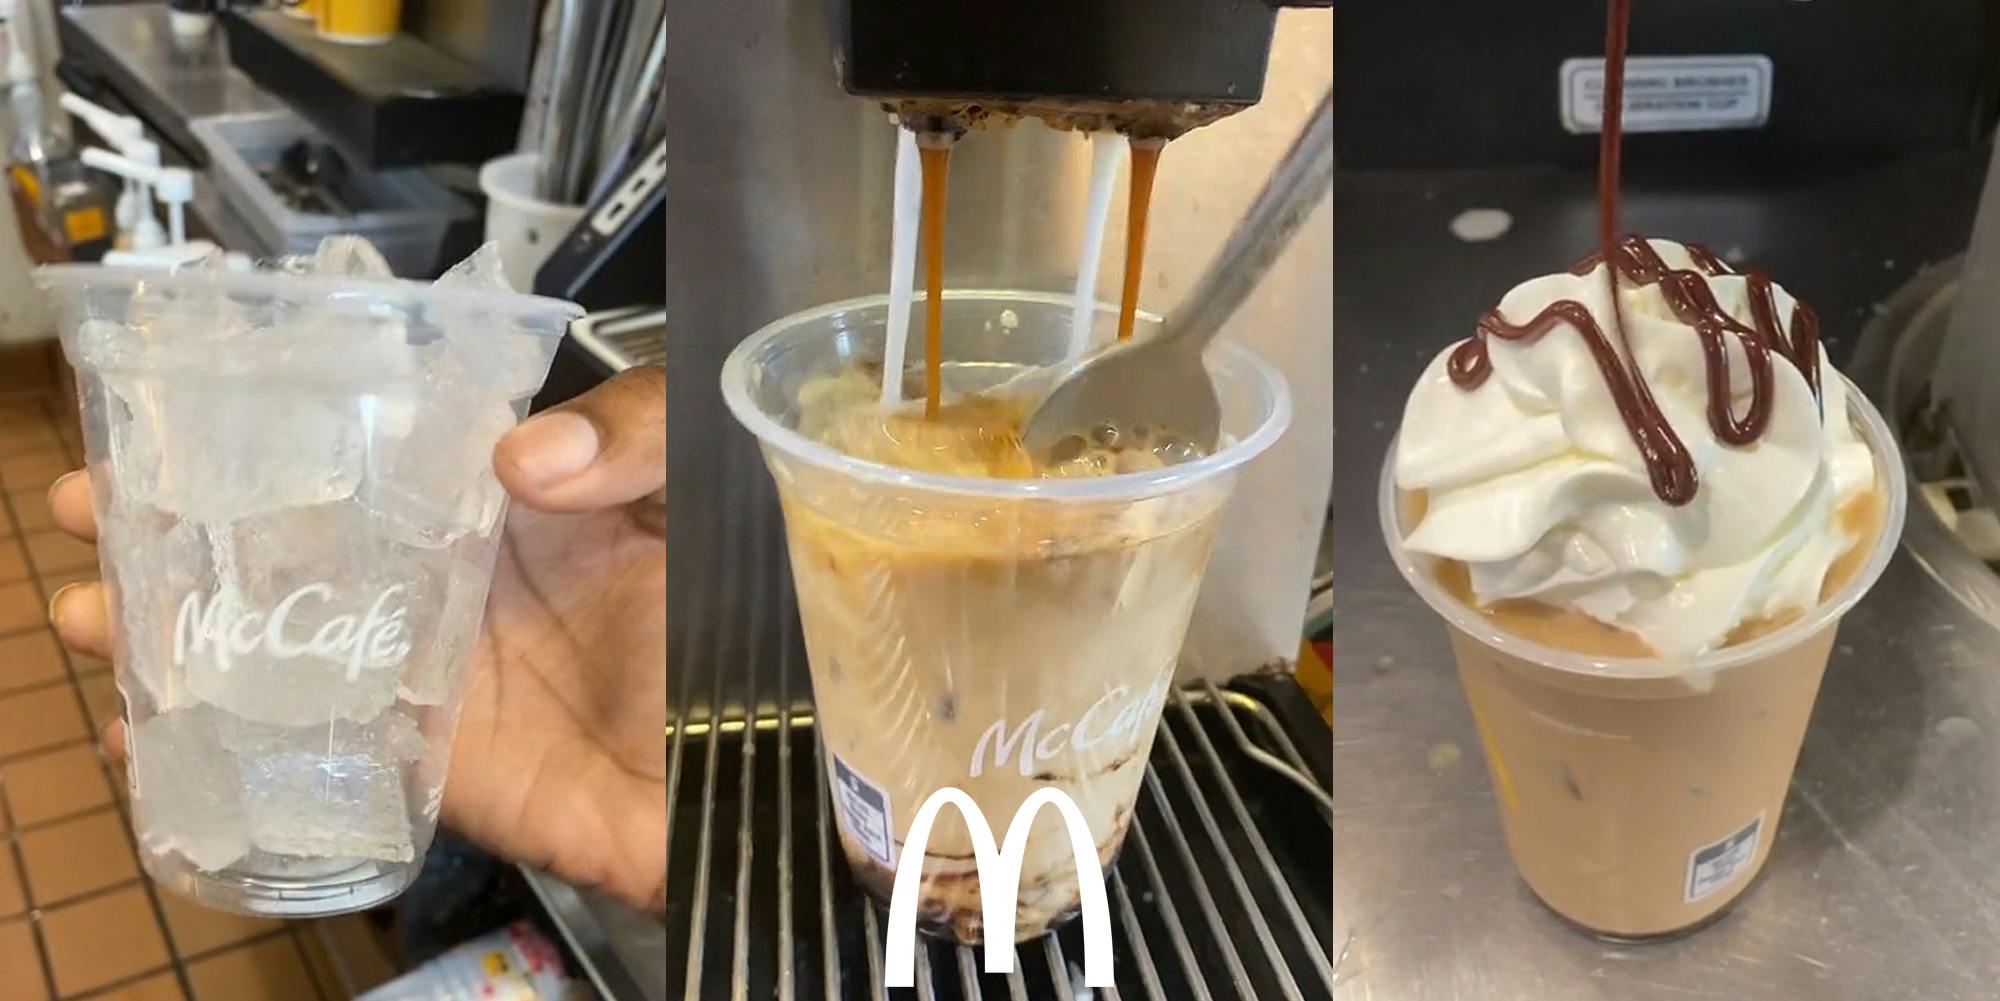 McDonald's worker holding cup of ice (l) McDonald's Iced Mocha being stirred with a spoon on machine with McDonald's "M" logo centered at bottom (c) McDonald's Iced Mocha with drizzle being poured on top (r)